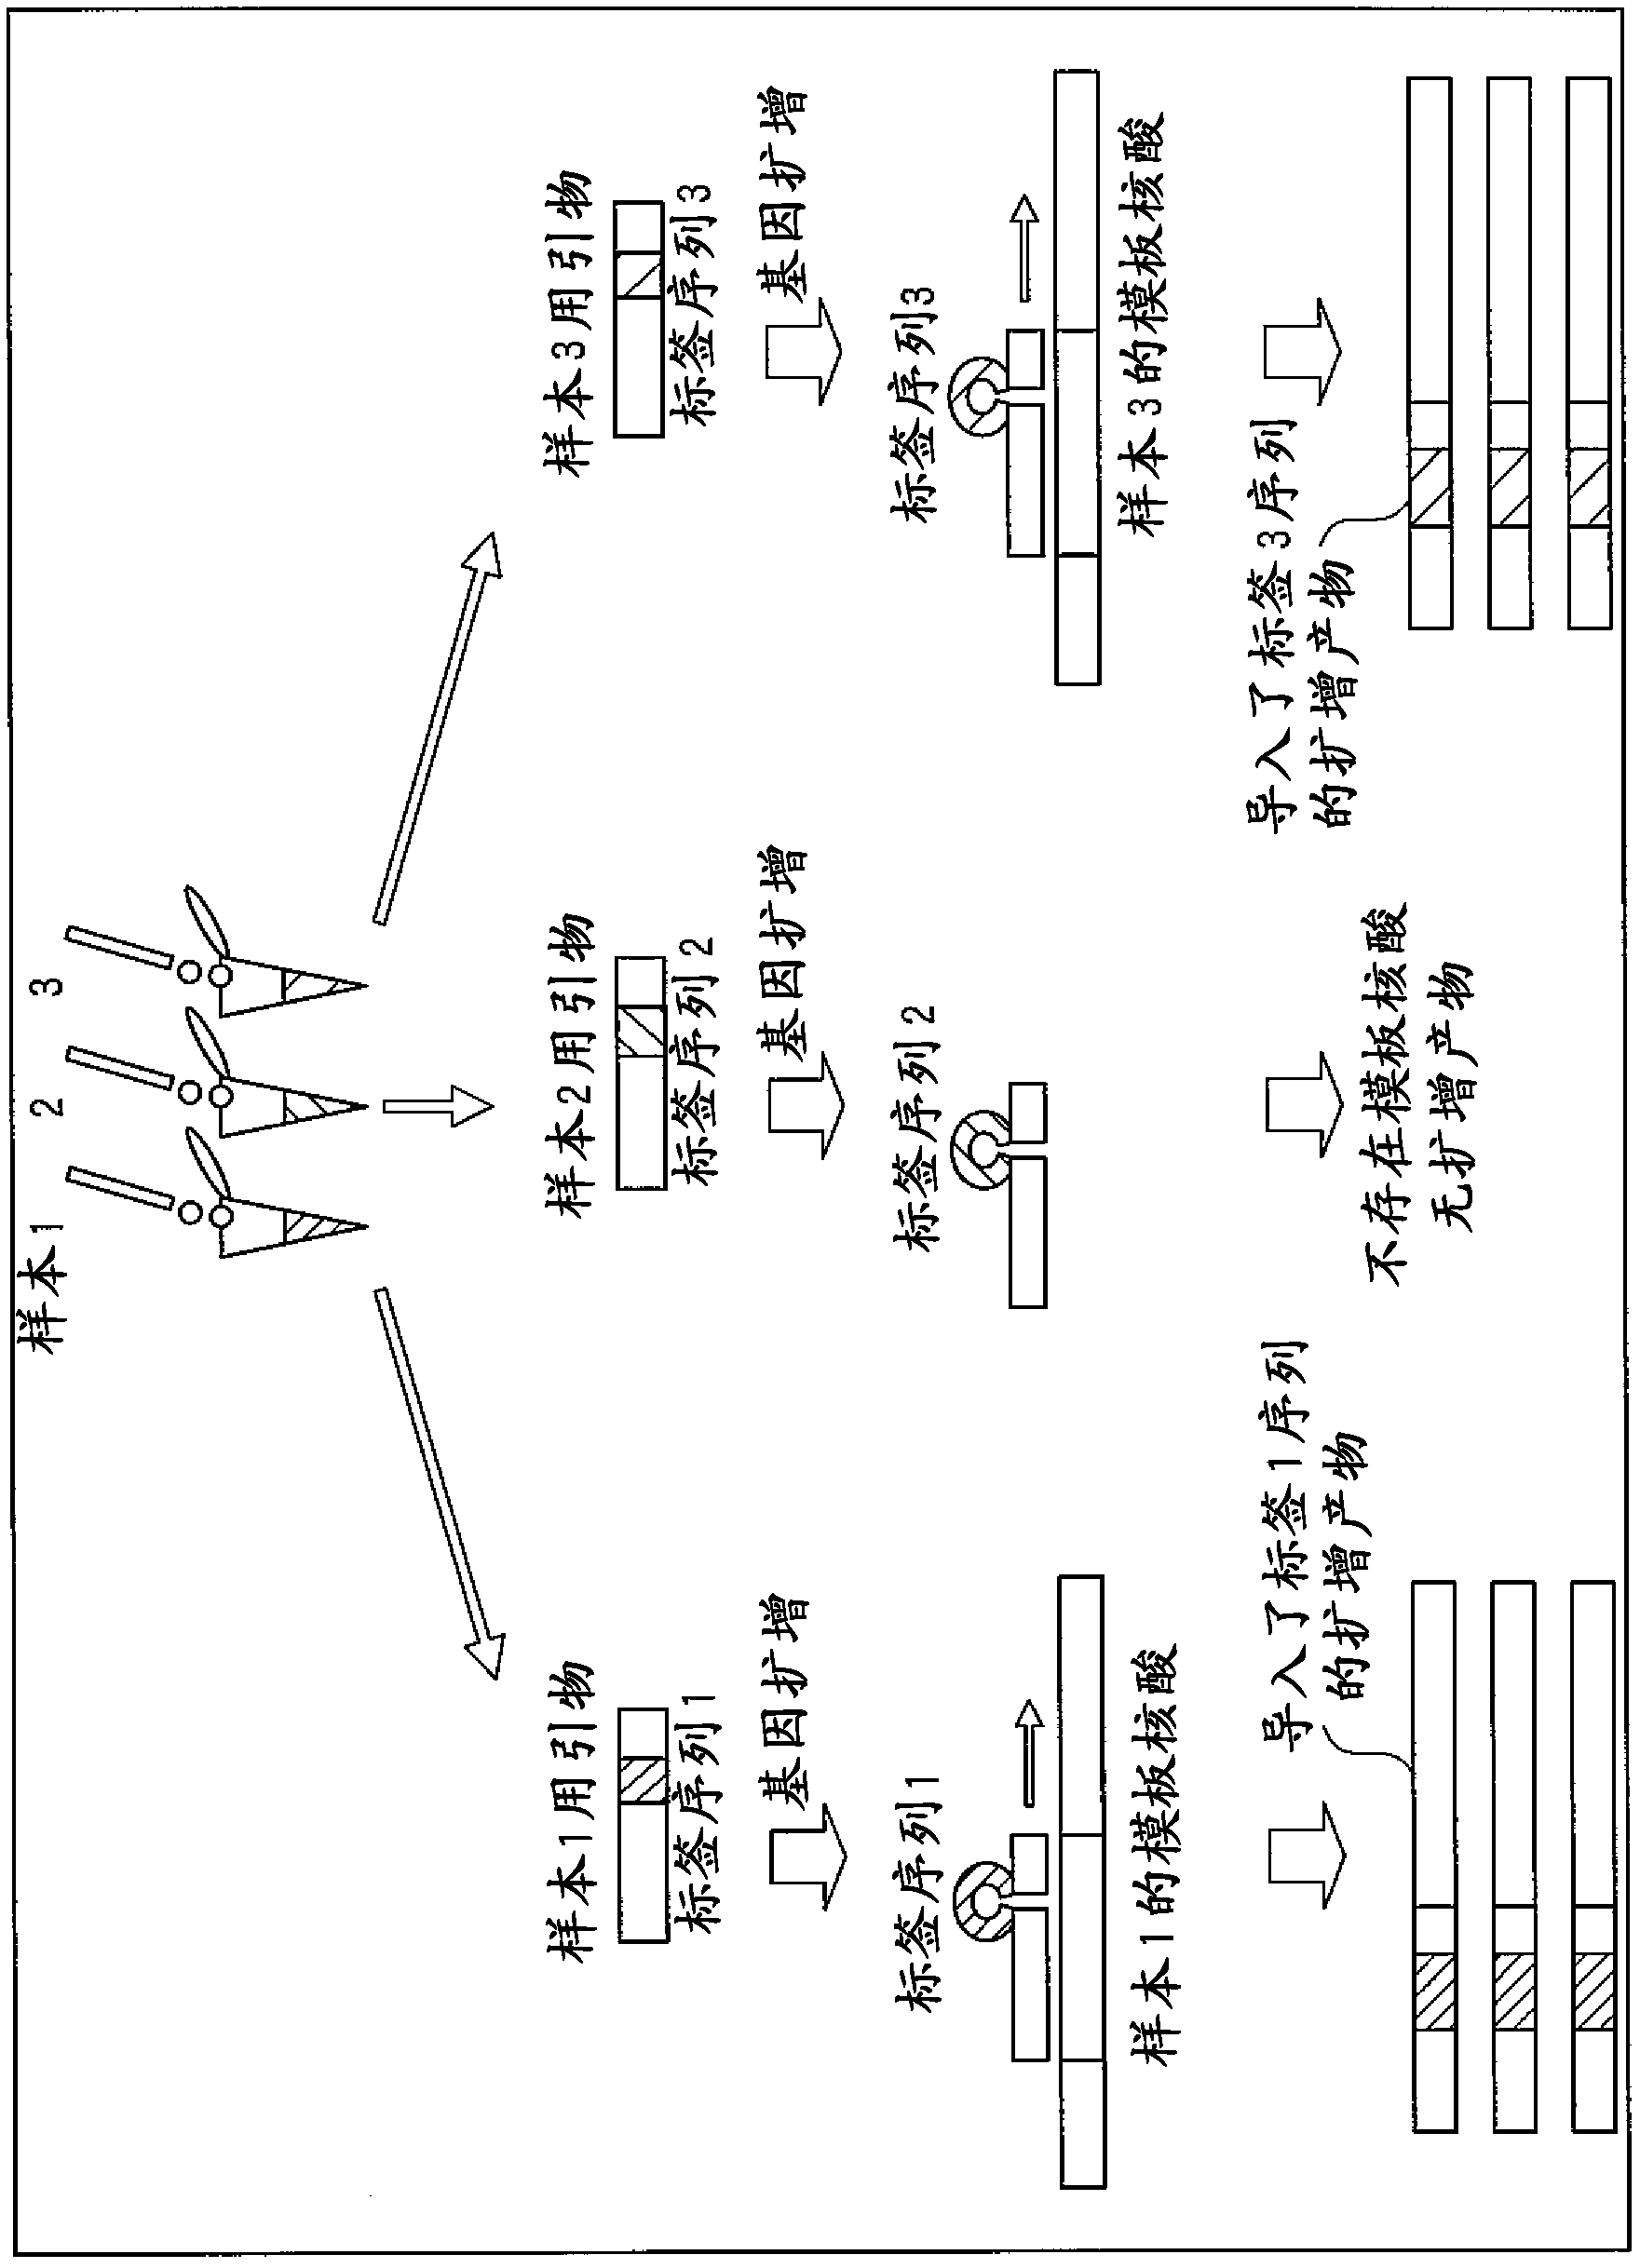 Sample analysis method and assay kit for use in the method